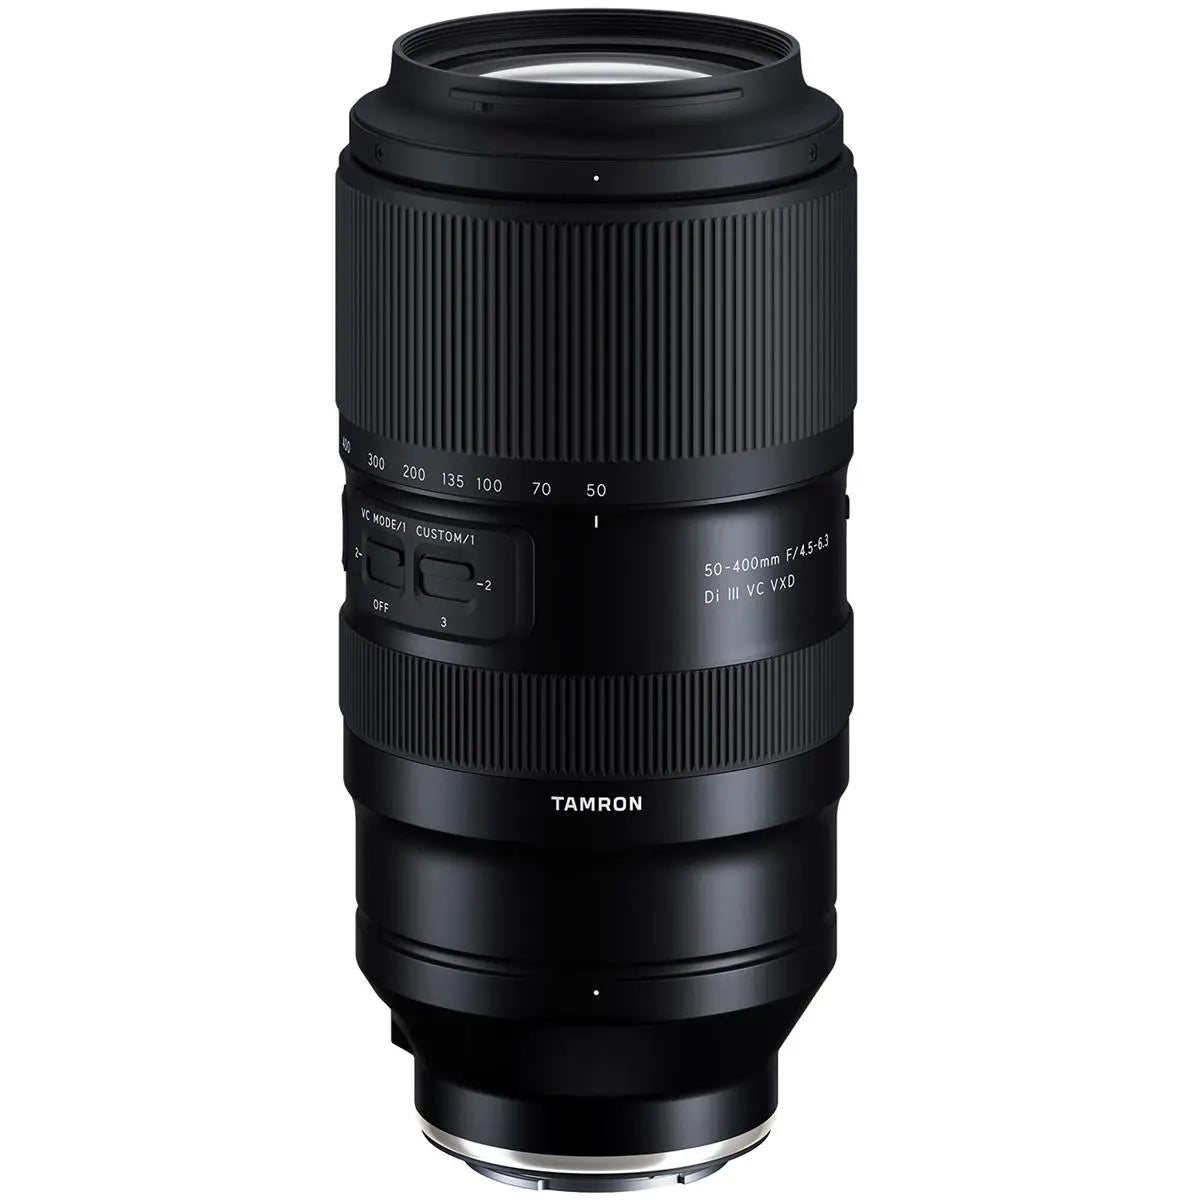 Tamron 50-400mm f/4.5-6.3 Di III VC VXD Lens for Sony